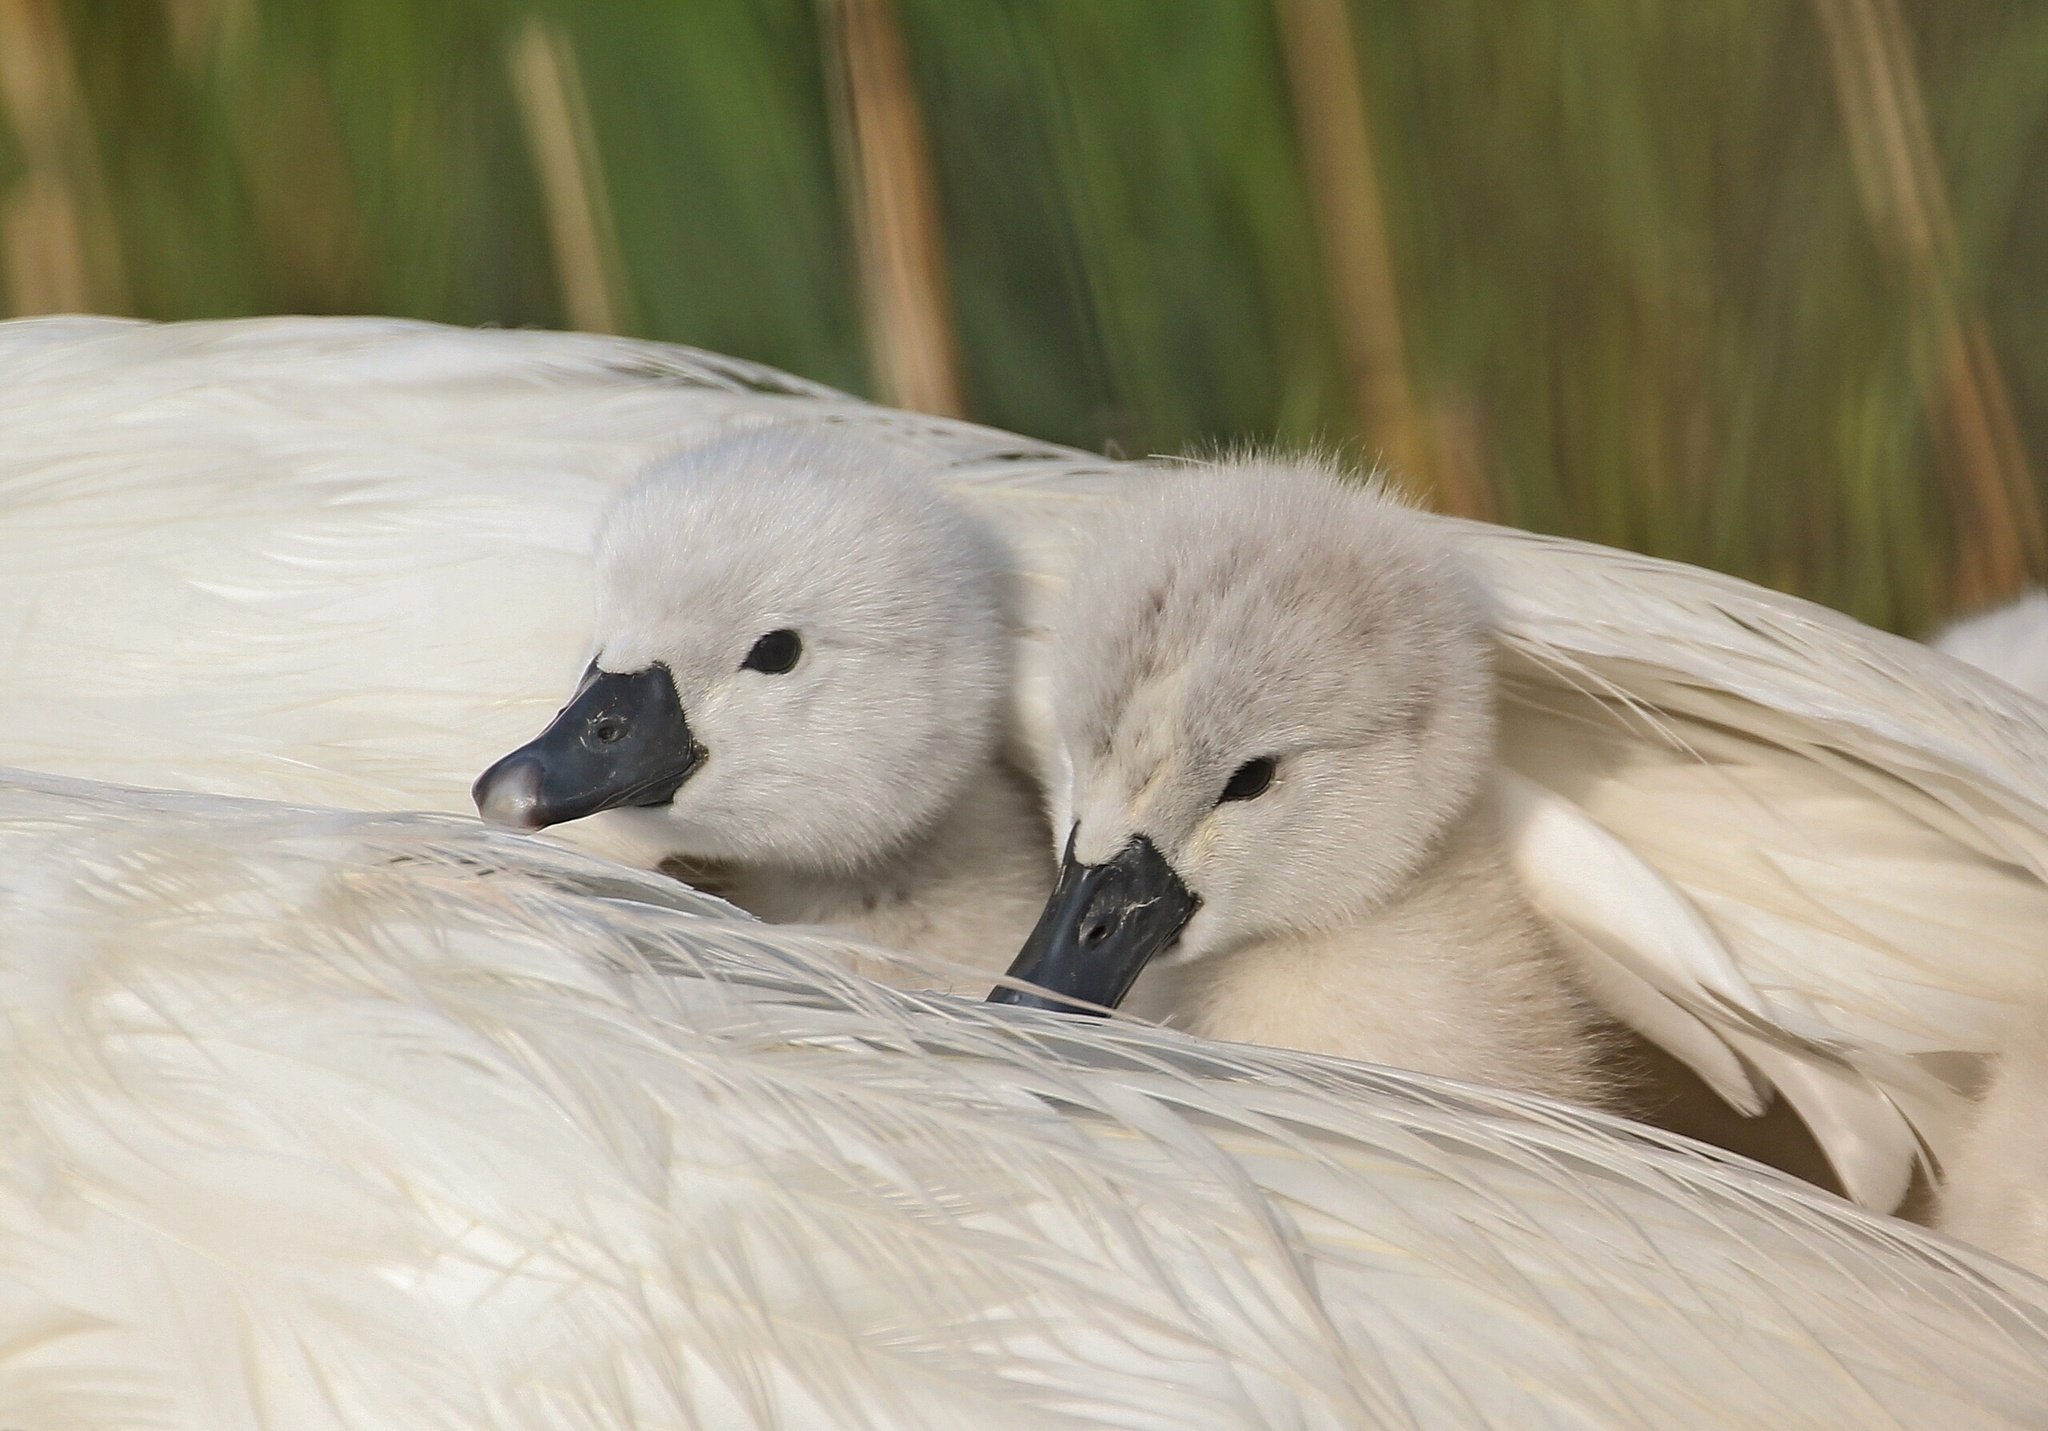 swans, Chicks, Feathers, Wing, Shelter, Swan Wallpaper